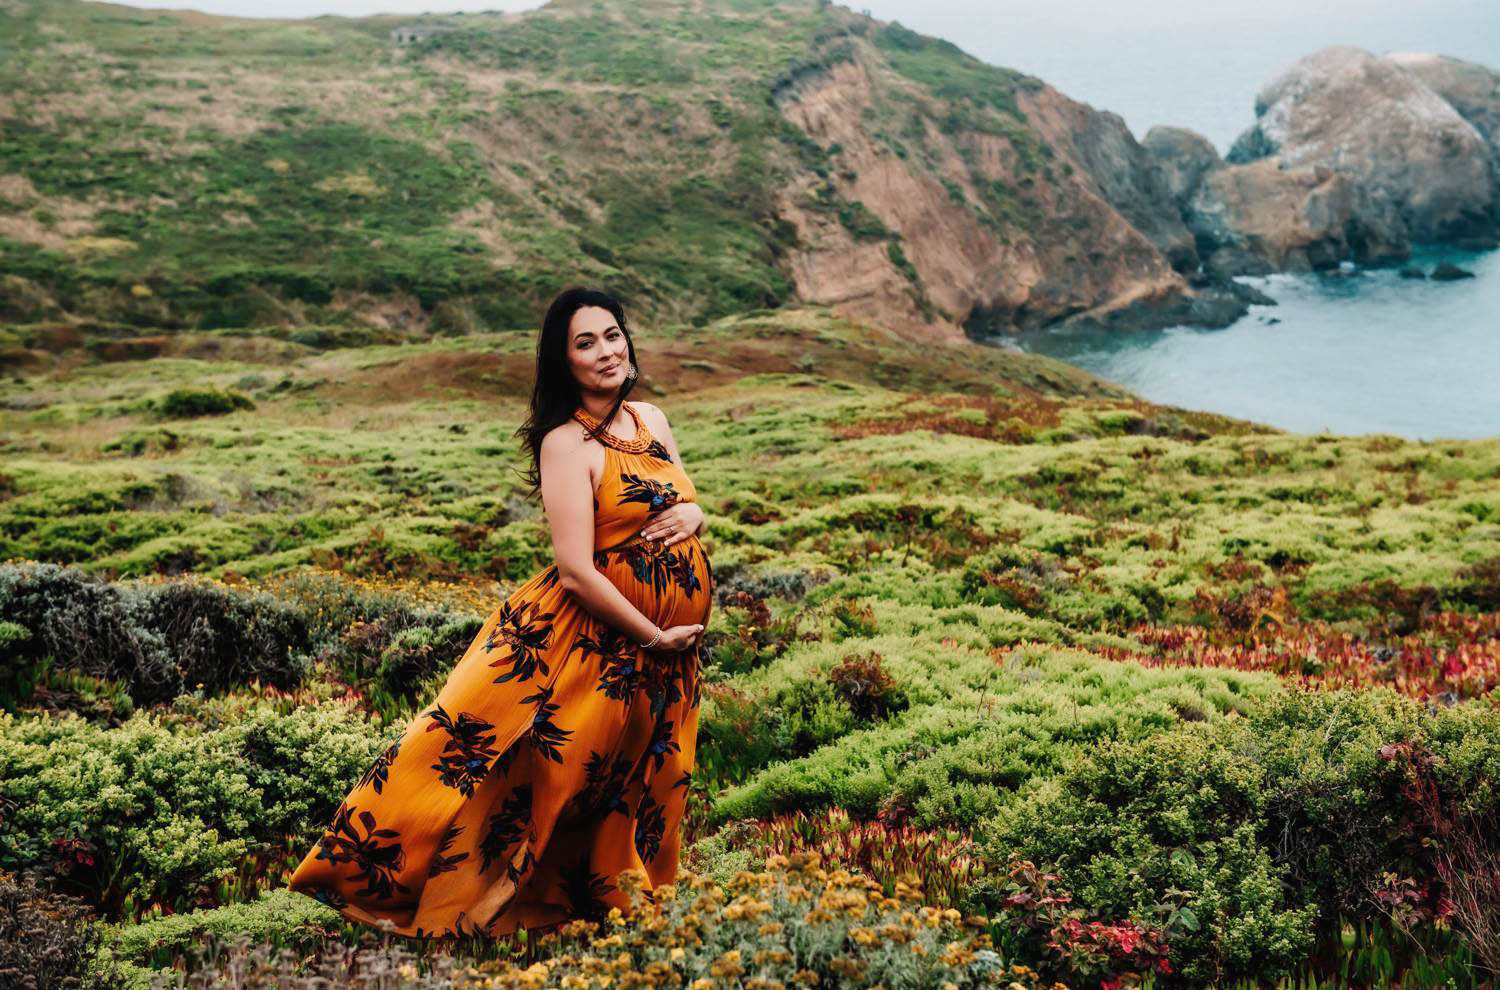 Captured Happiness Photography uses maternity poses like this one, which a pregnant woman standing on the seaside cliffs in Hawaii as her colorful dress flows behind her